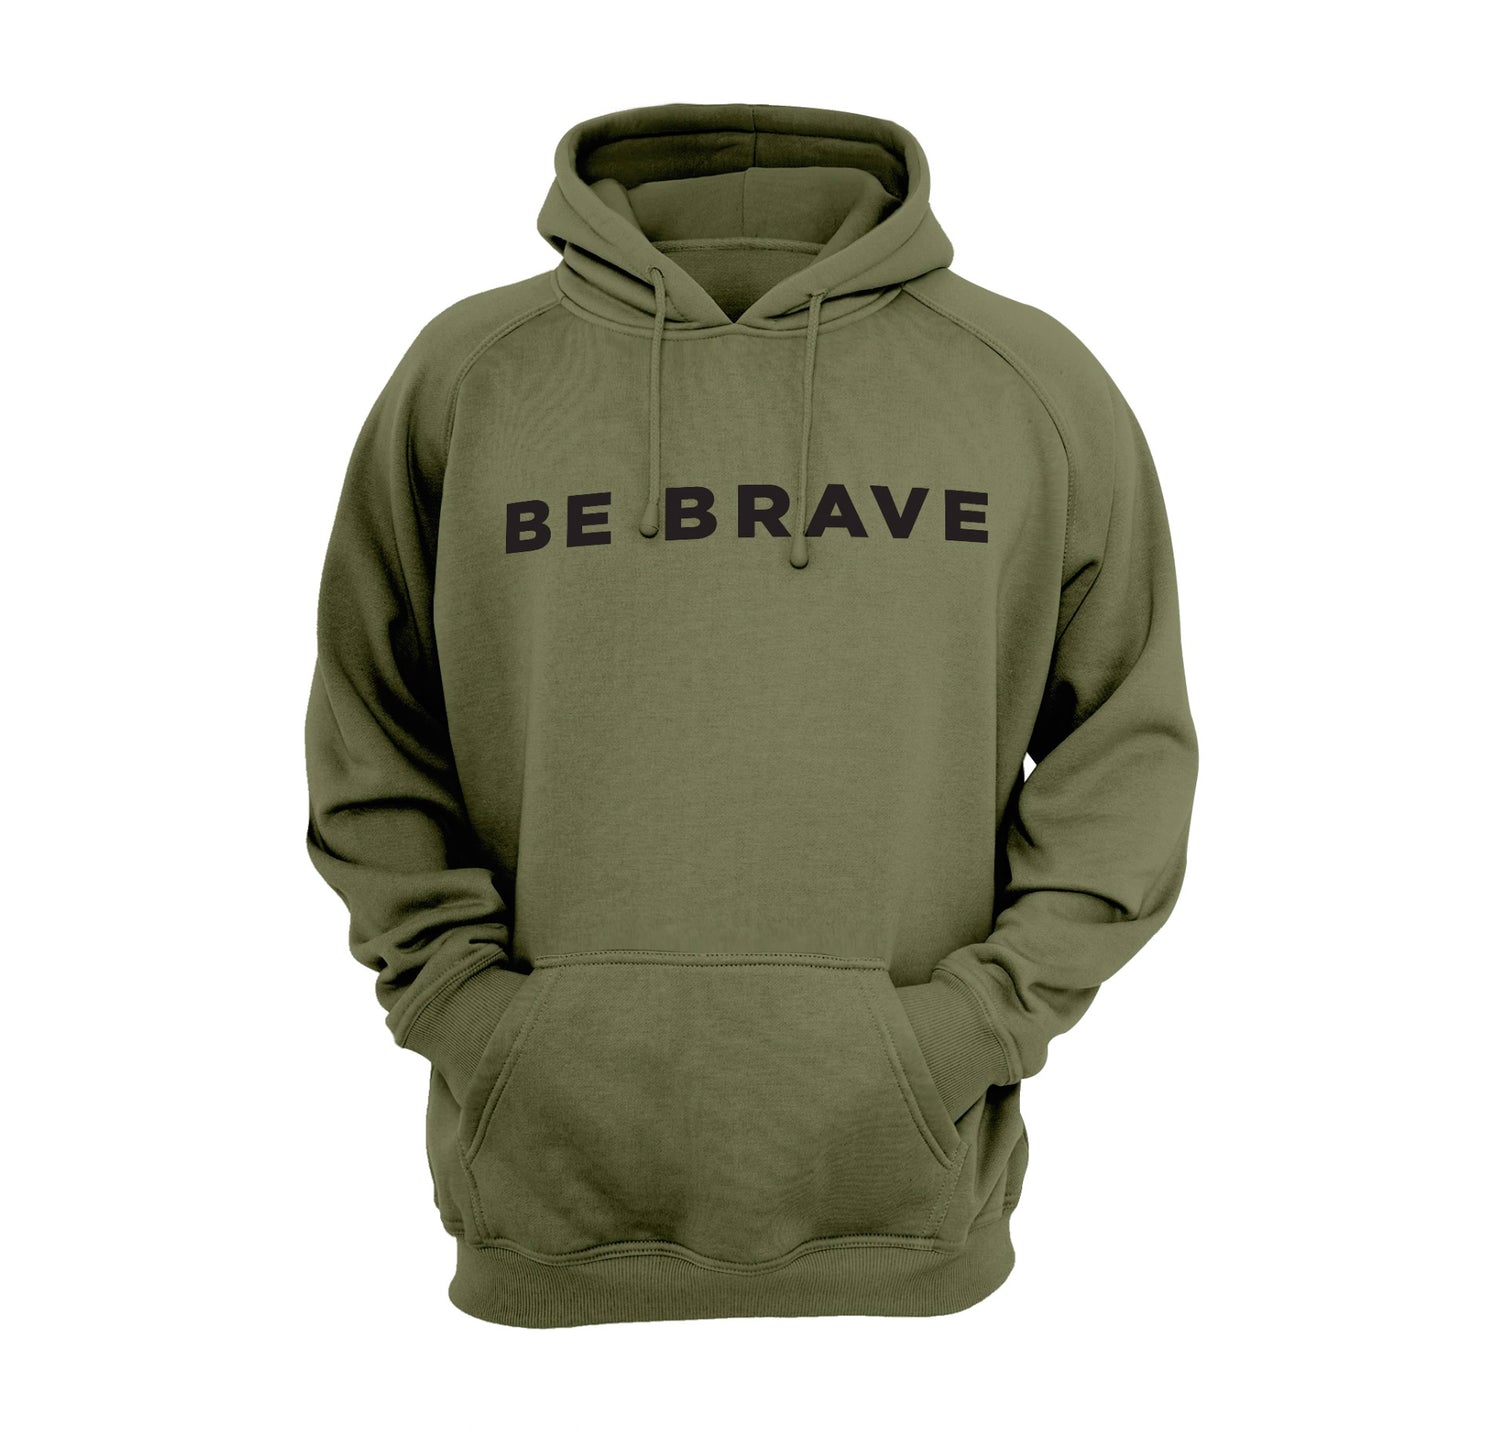 Be Brave Military Green Hoodie - American Campfire Revival